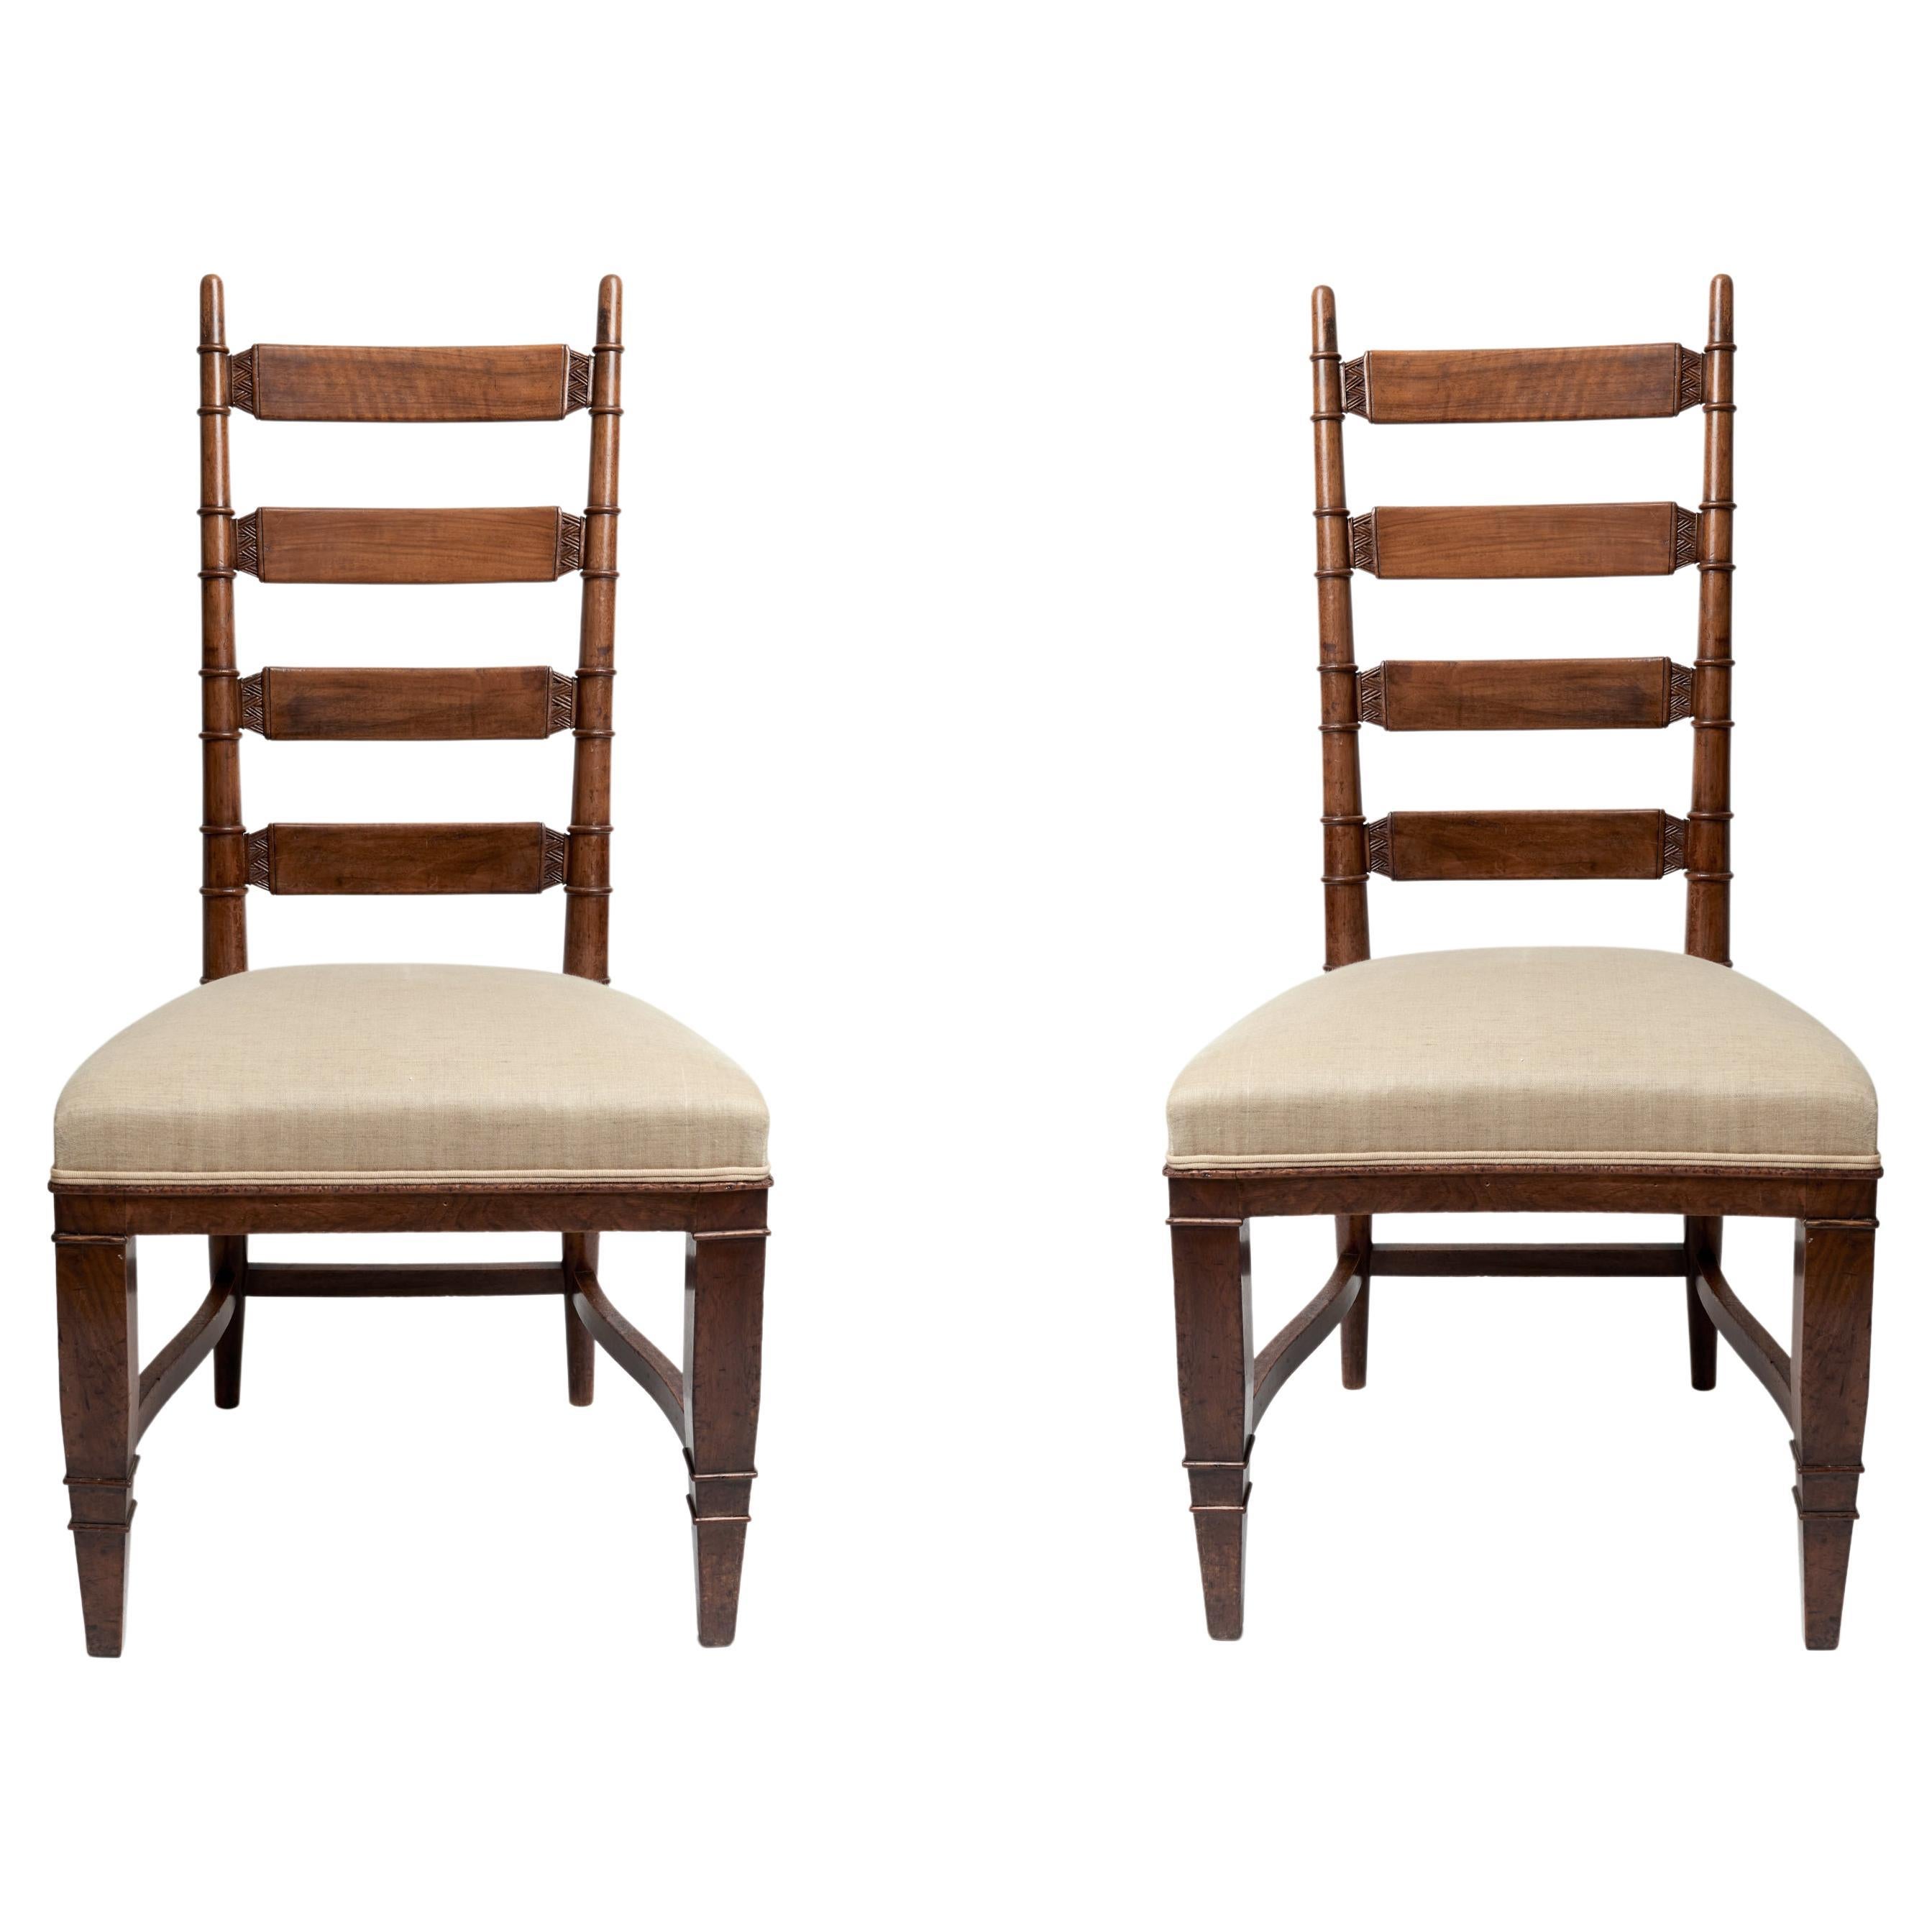 Tomaso Buzzi 1929 Pair of Wooden Structure Chairs For Sale